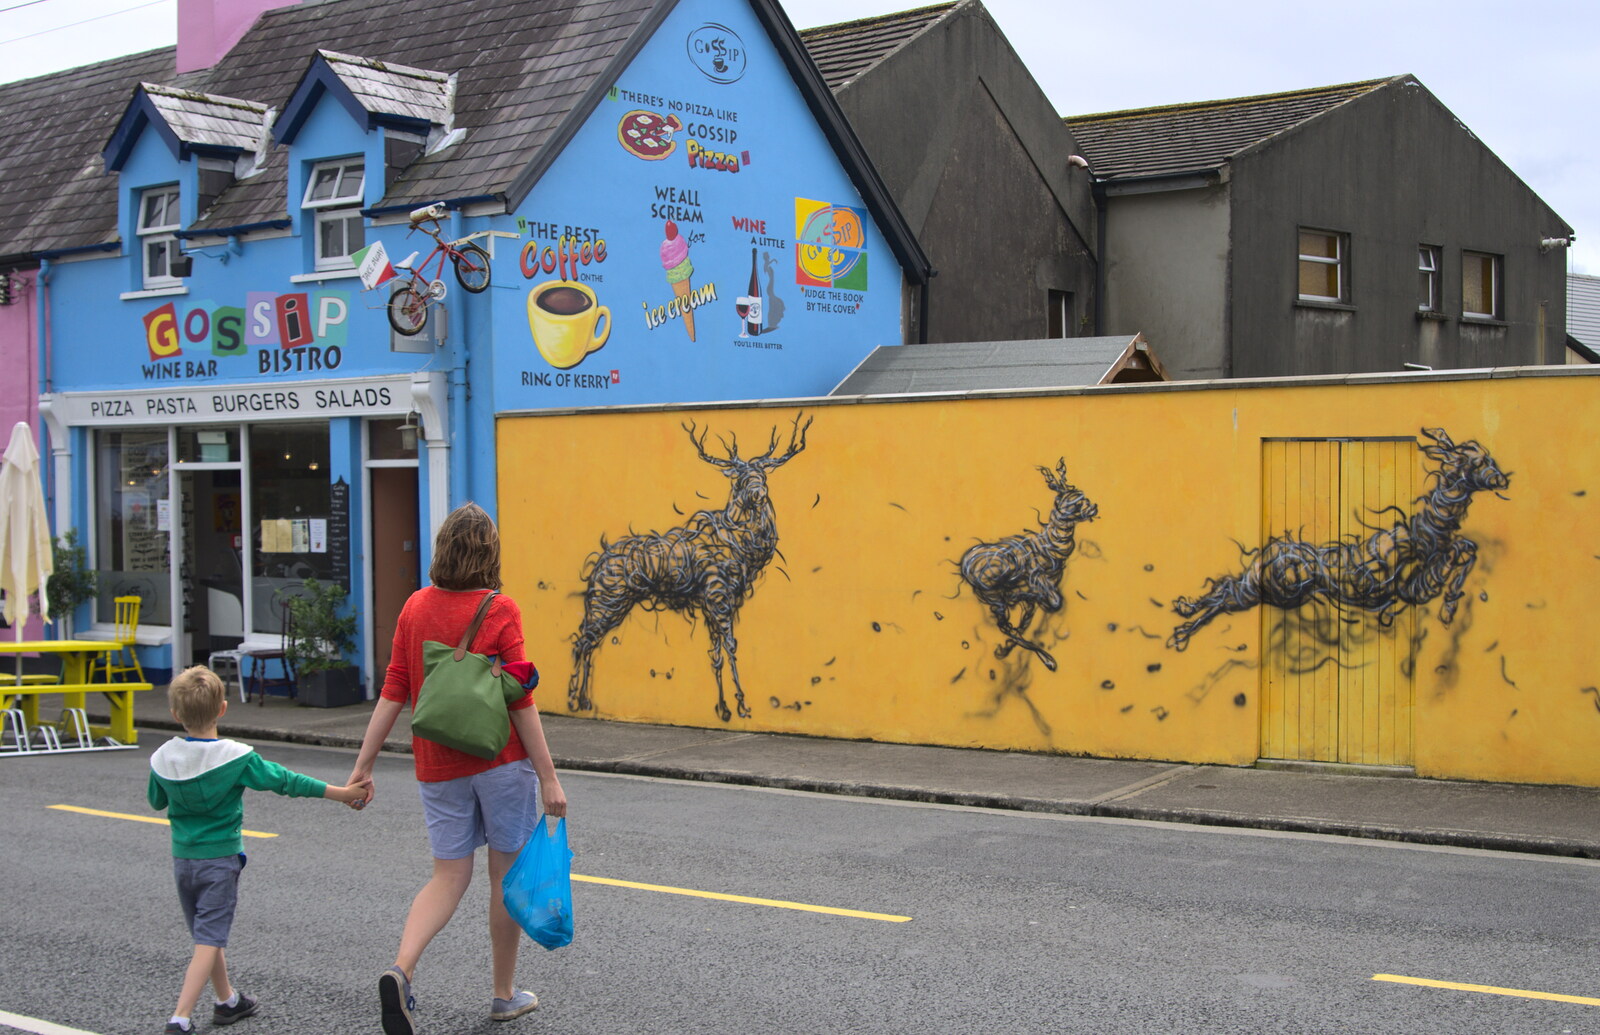 Harry and Isobel near some wall art/graffiti from In The Sneem, An tSnaidhm, Kerry, Ireland - 1st August 2017